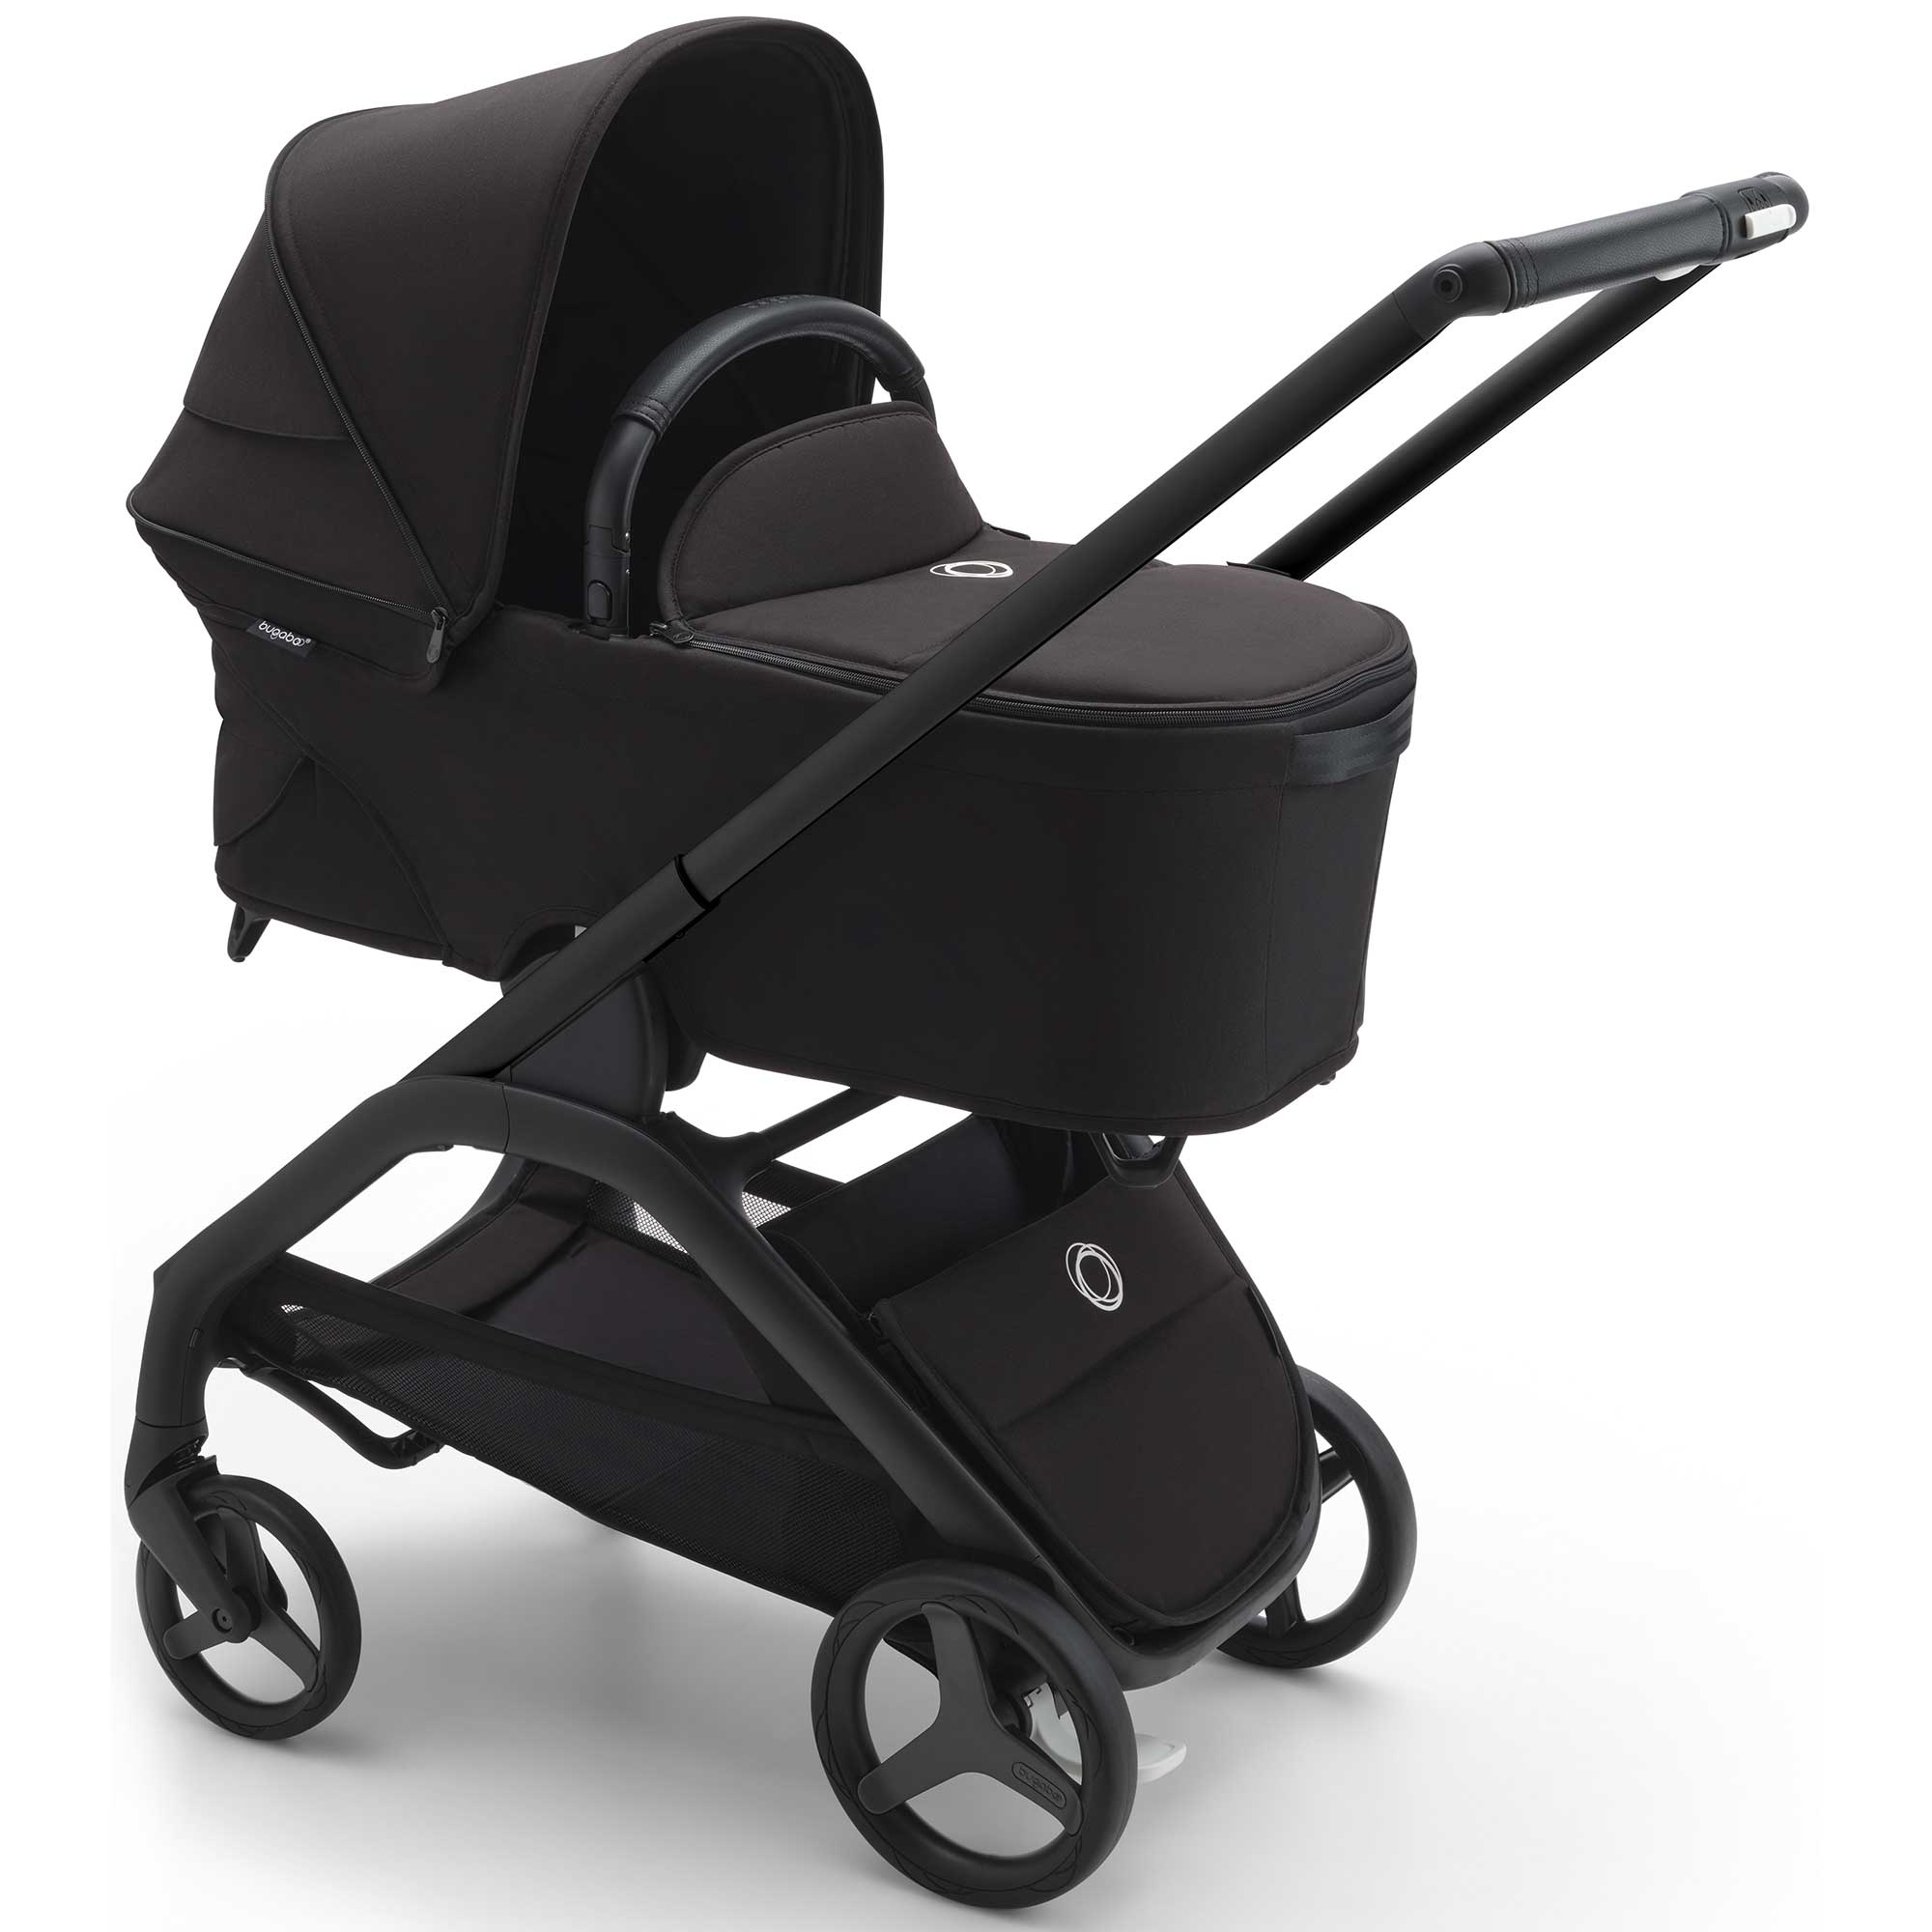 Bugaboo Travel Systems Bugaboo Dragonfly Pebble 360 Pro Travel System in Black/Midnight Black 13817-BLK-MID-BLK